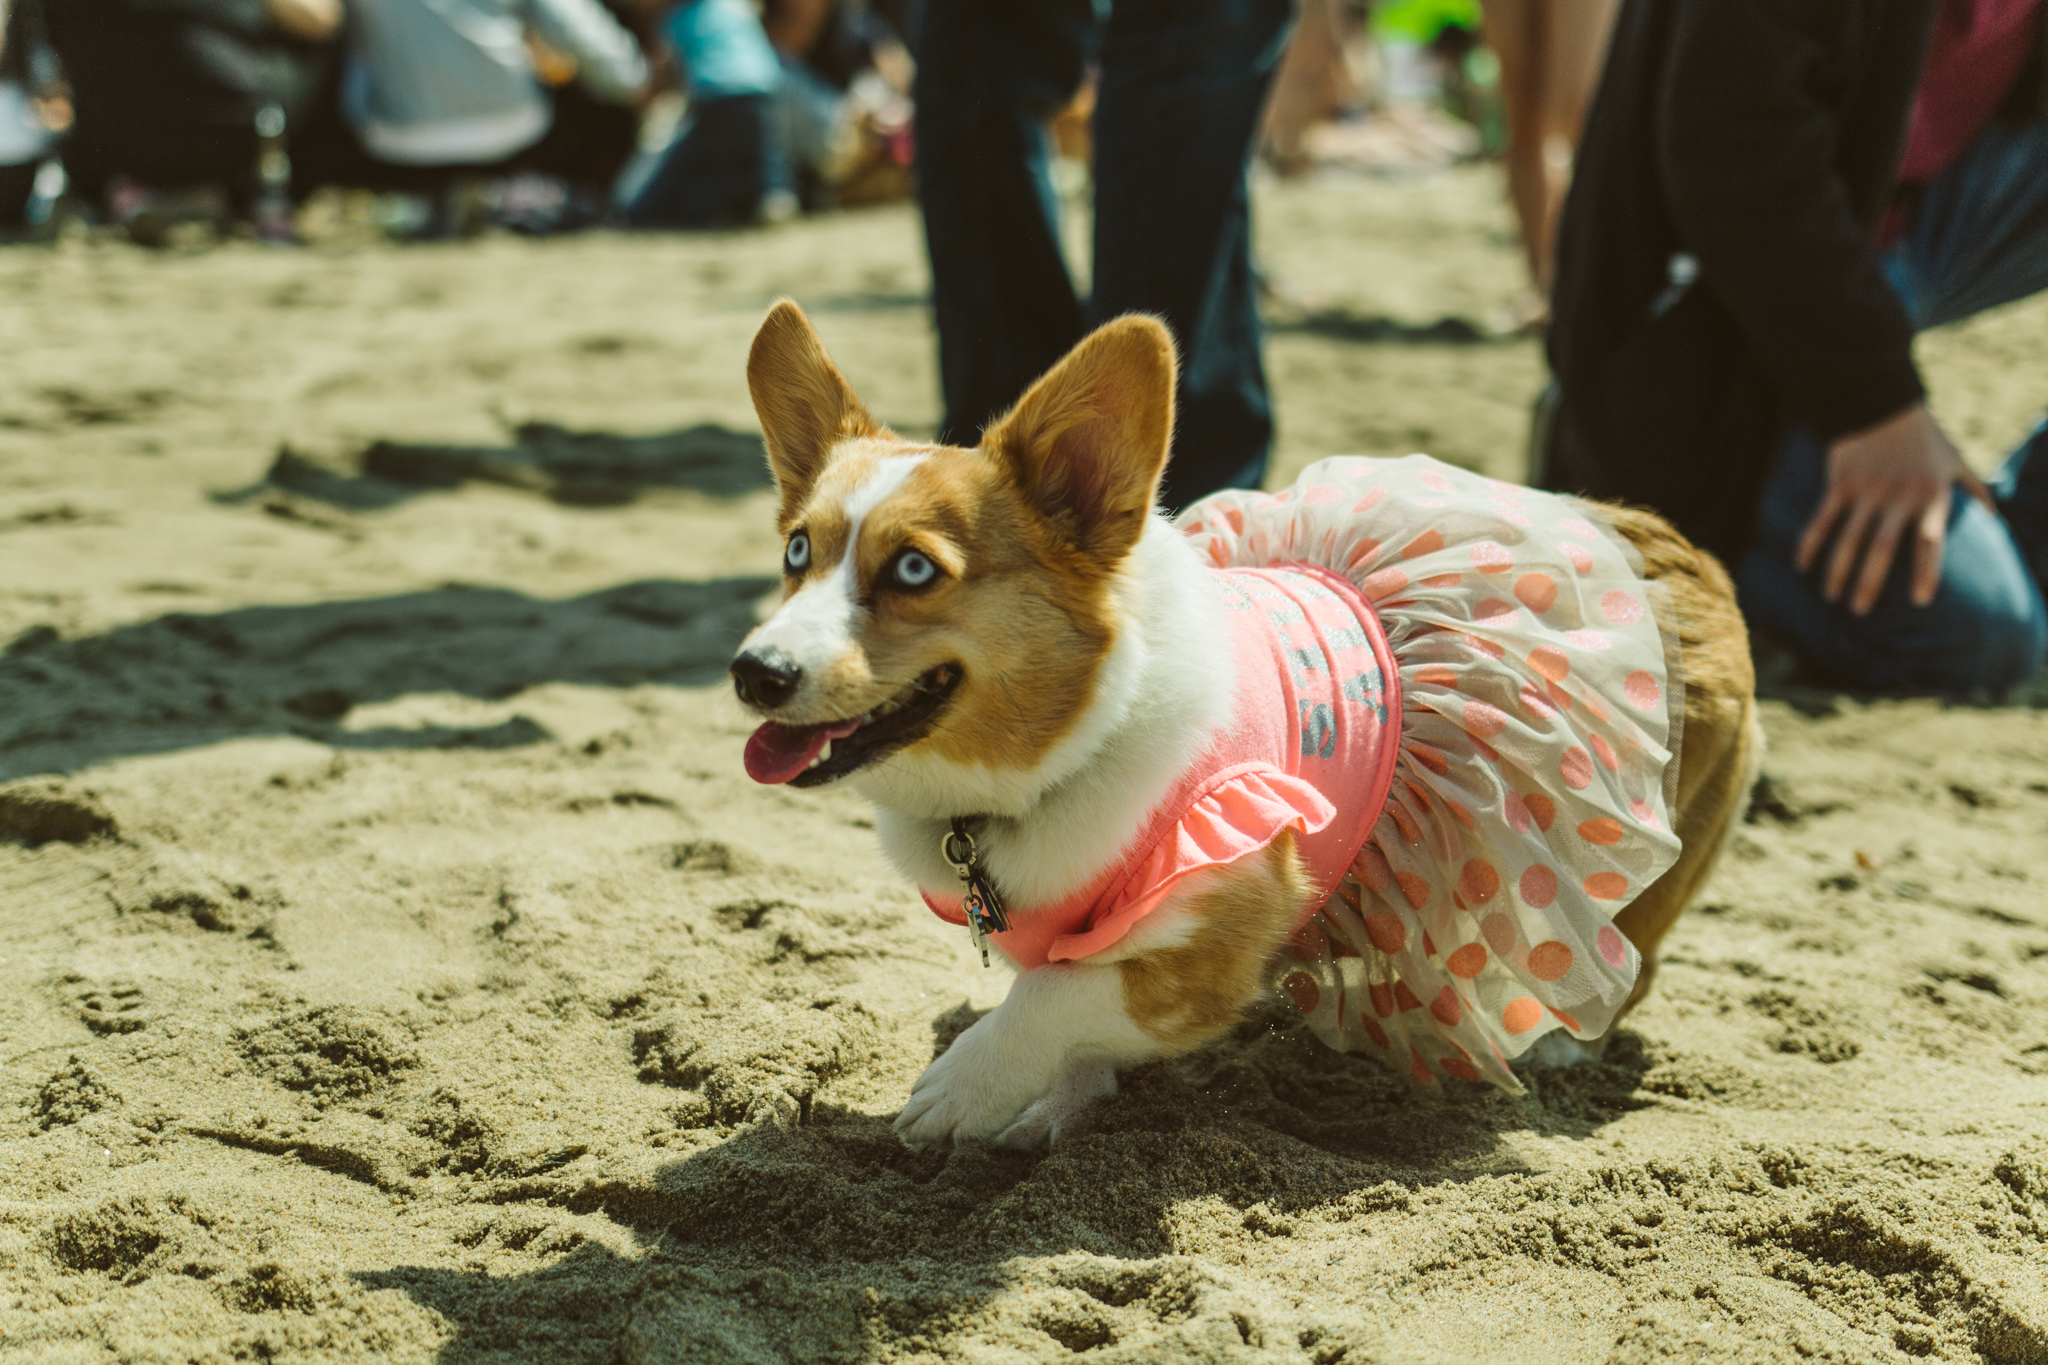 The dogs were out at Huntington Beach for So Cal Beach Day